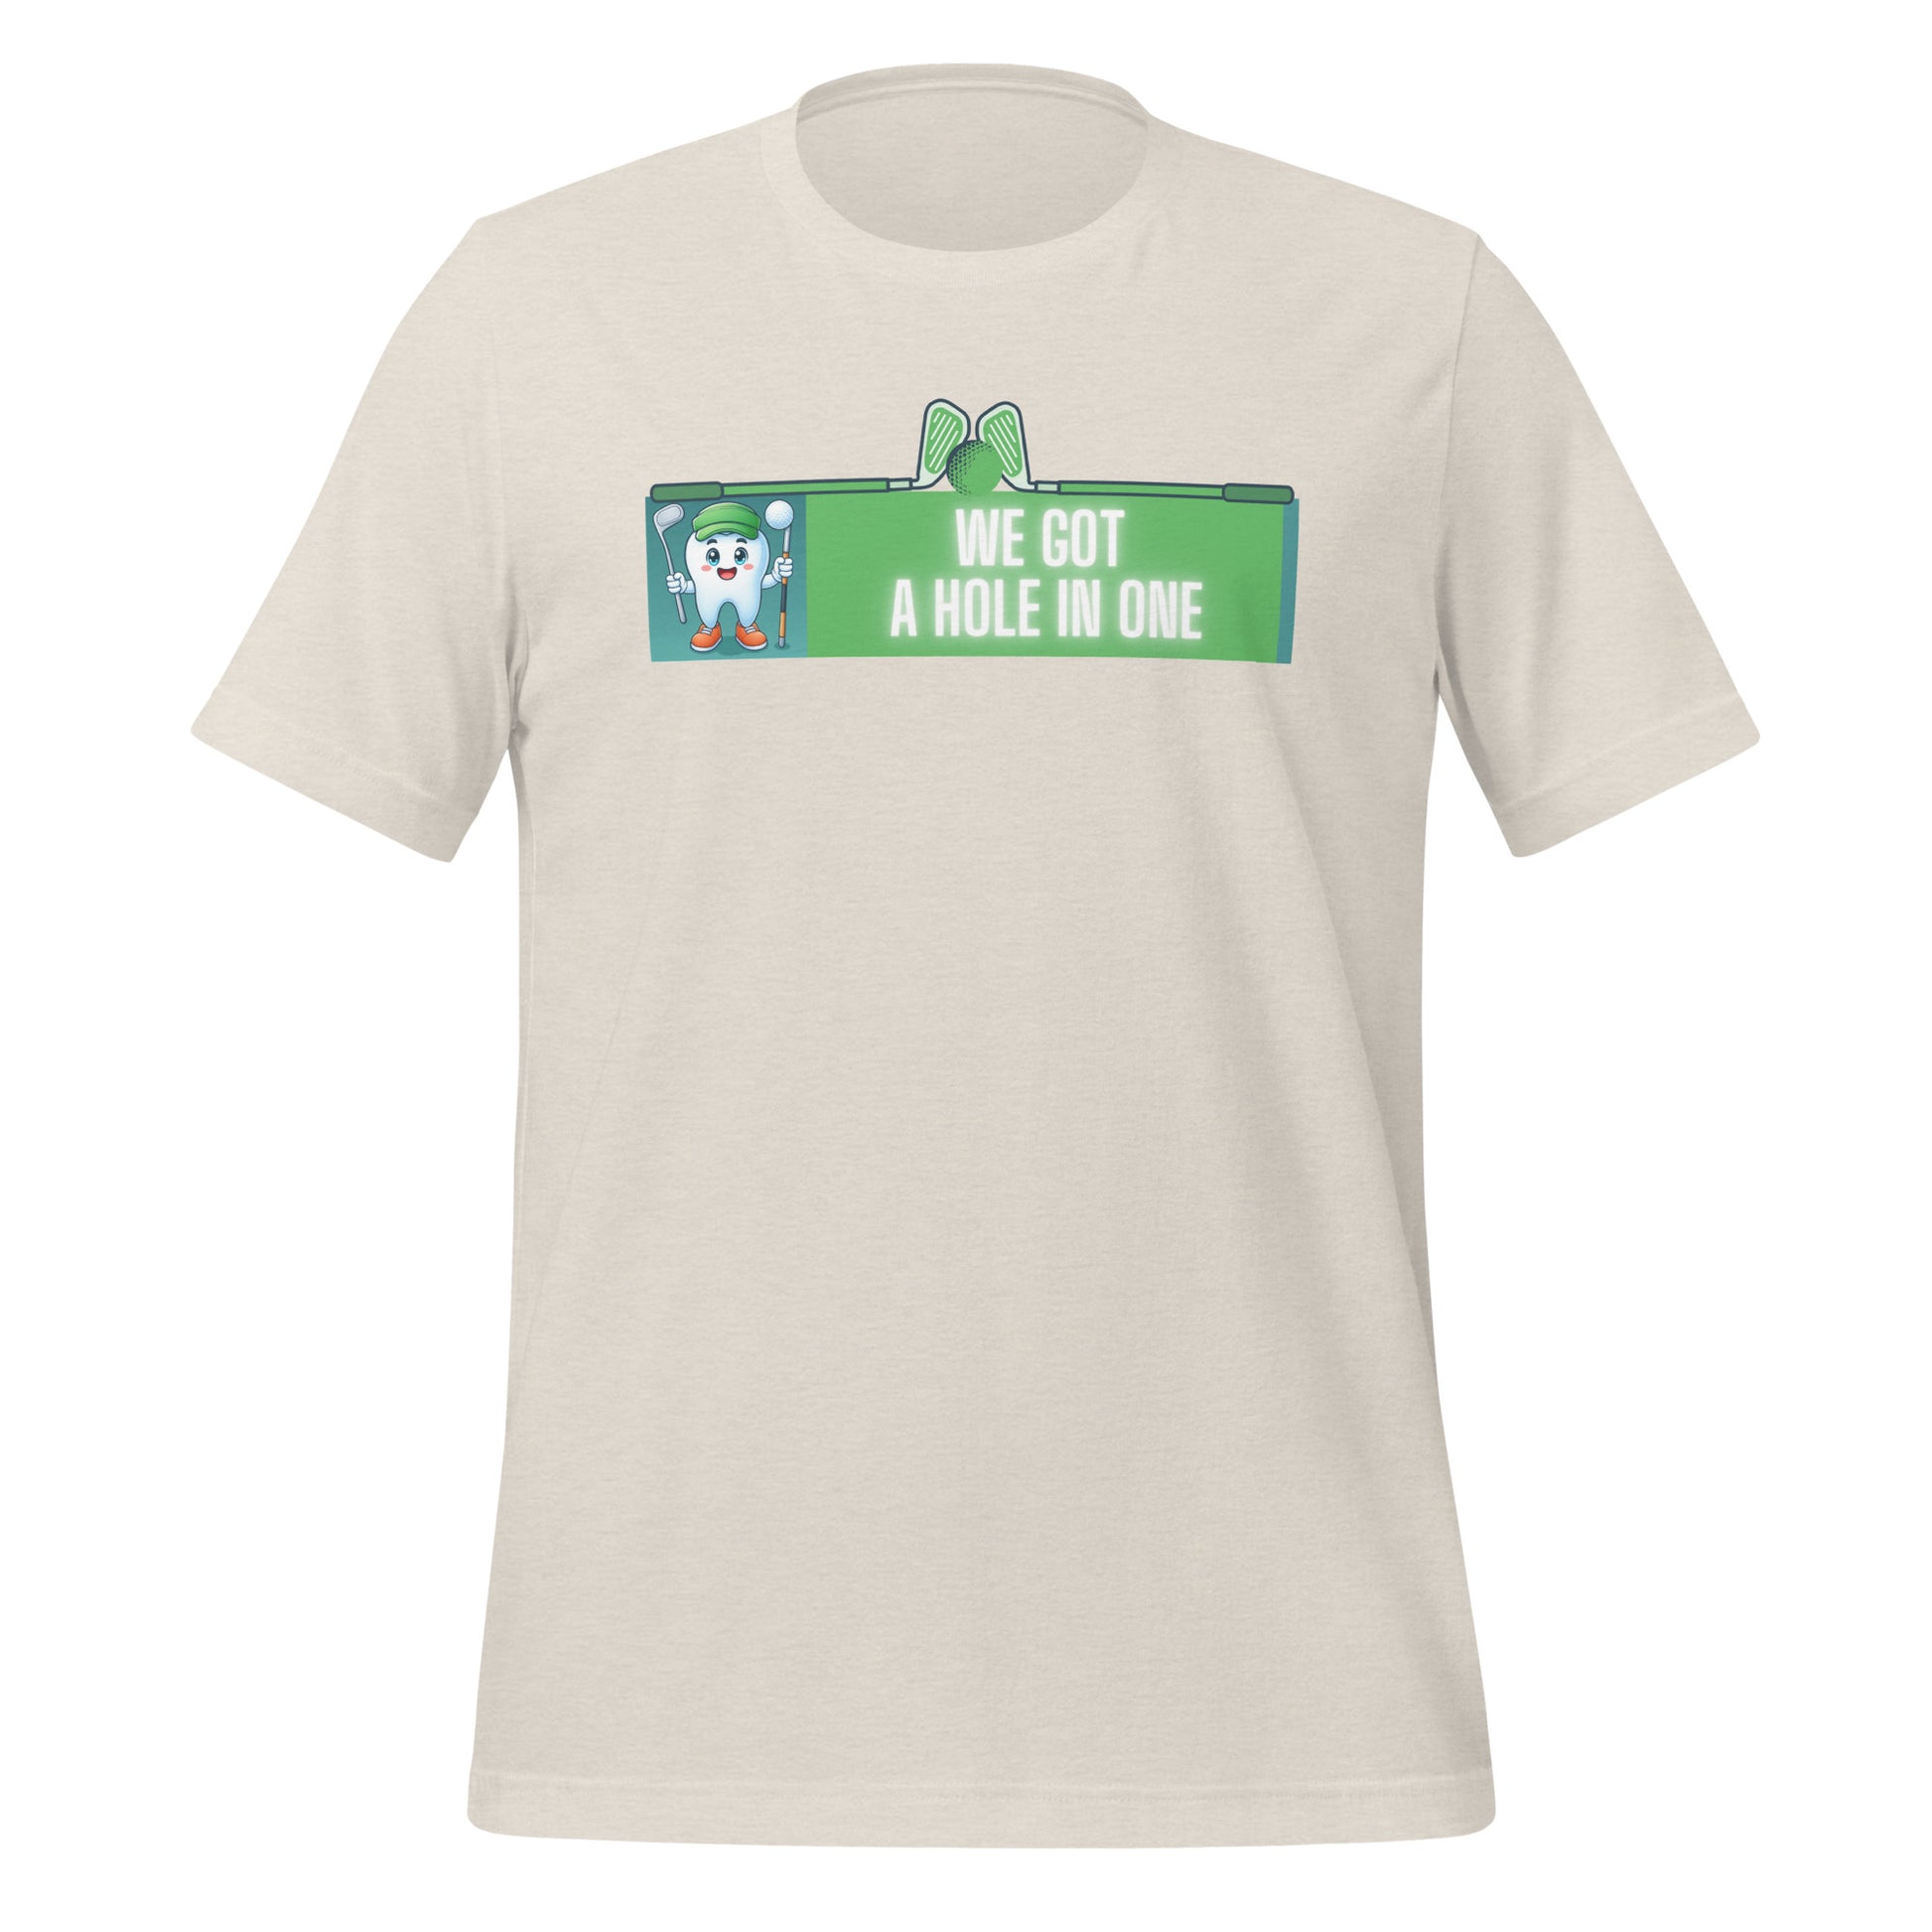 Cute dentist t-shirt showcasing an adorable tooth character in golf attire, joyfully celebrating a ‘hole in one’ achievement, perfect for dentist and dental professionals seeking unique and thematic dental apparel. Heather dust color, front view.